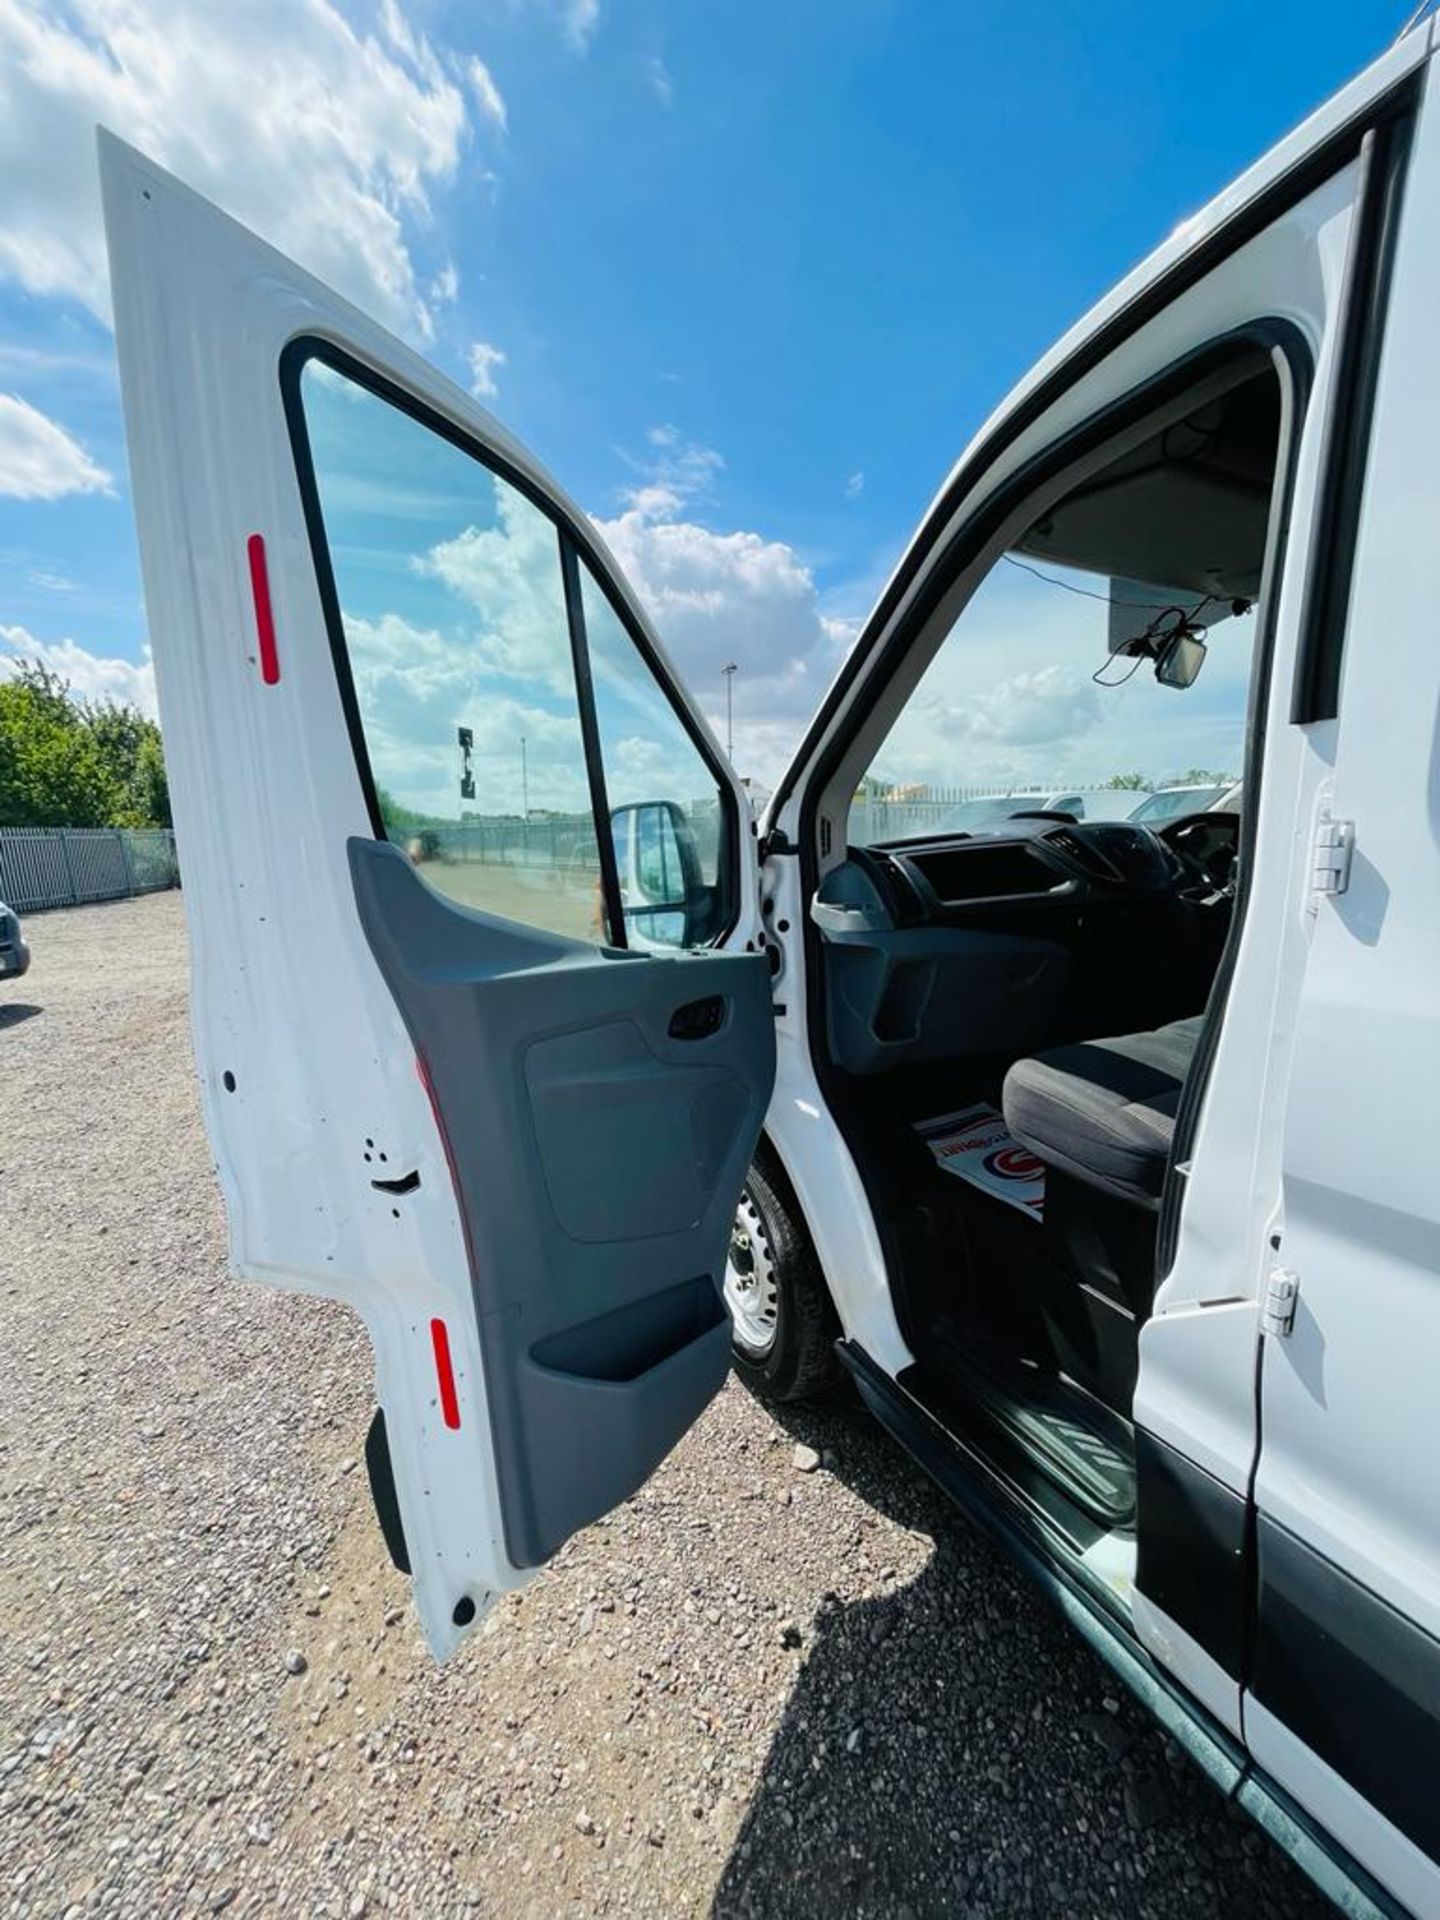 ** ON SALE **Ford Transit 2.0 TDCI 130 Double Cab Tipper 2018 '18 Reg' Euro 6 - ULEZ Compliant - Image 16 of 28